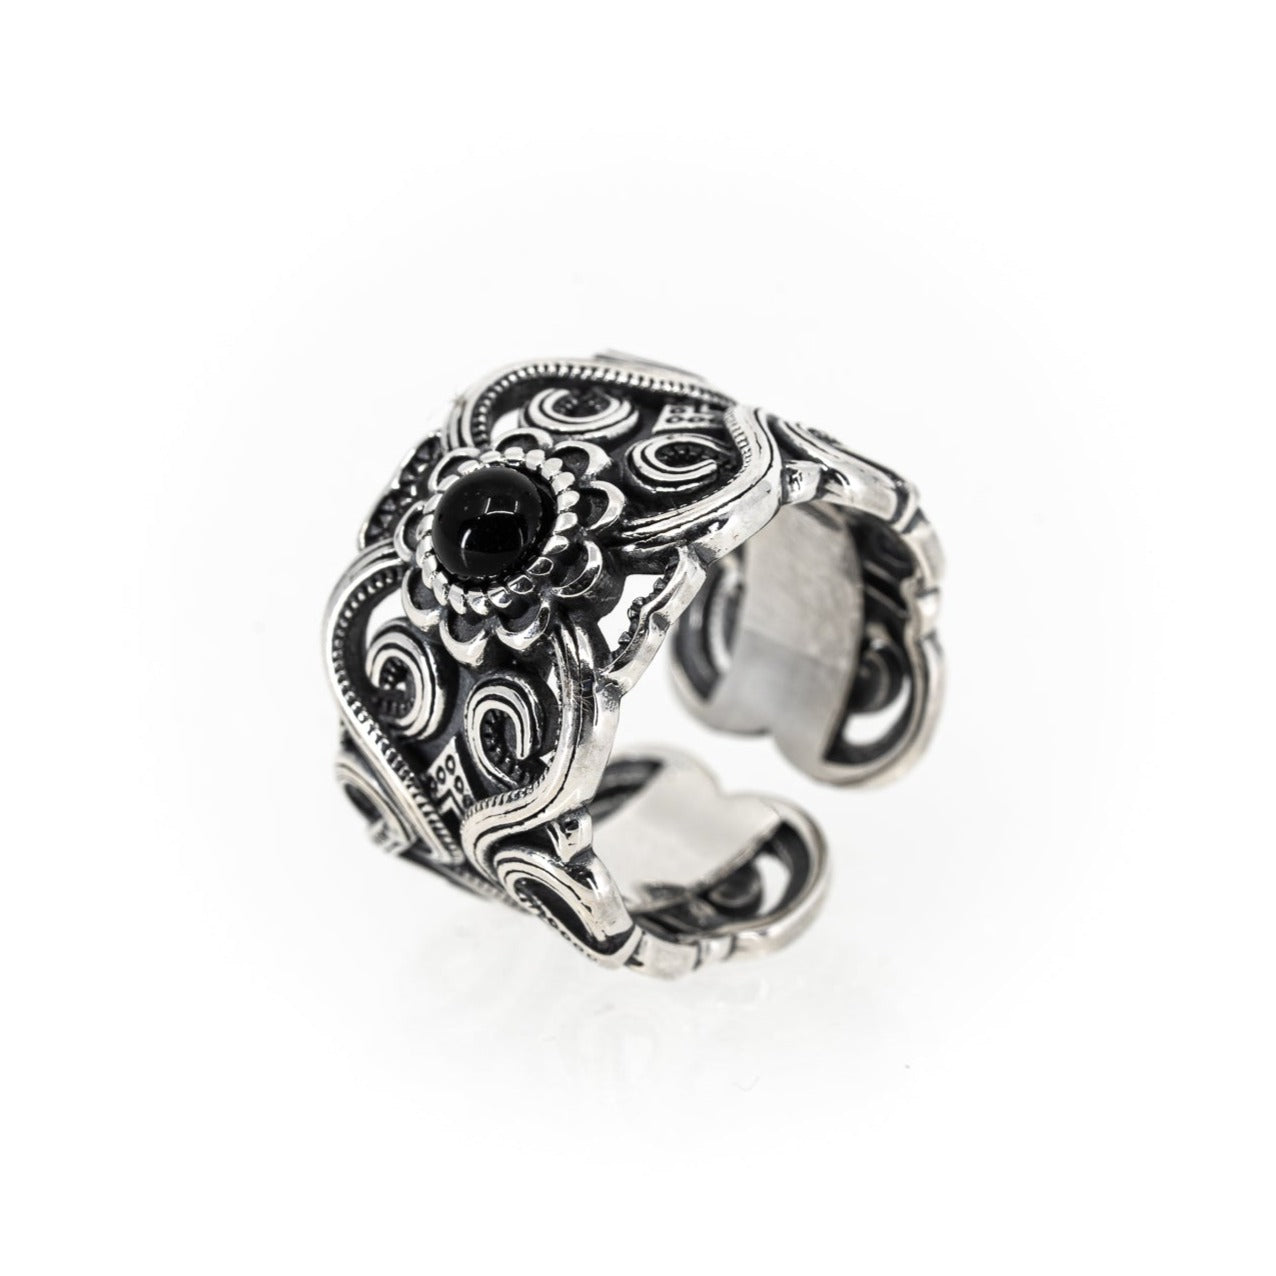 Sterling Silver Celtic pattern Ring with black gem by Black Feather Design